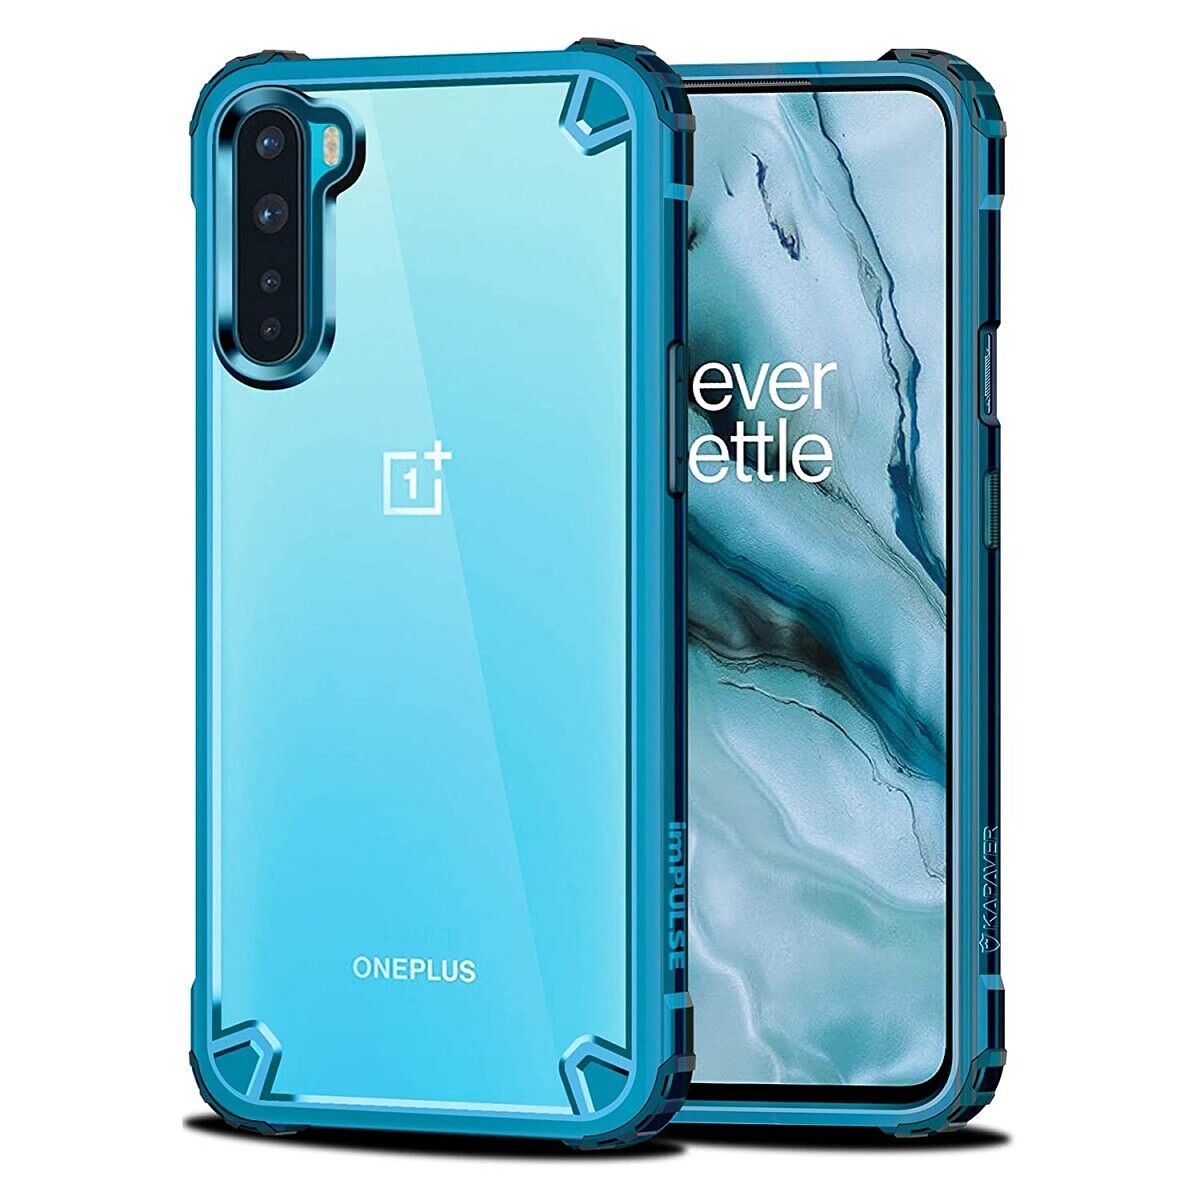 The Kapaver Impulse is a hybrid case with a transparent polycarbonate back and a TPU bumper for shock absorption. Available in Sea Blue and Moon Gray colors for bumper.